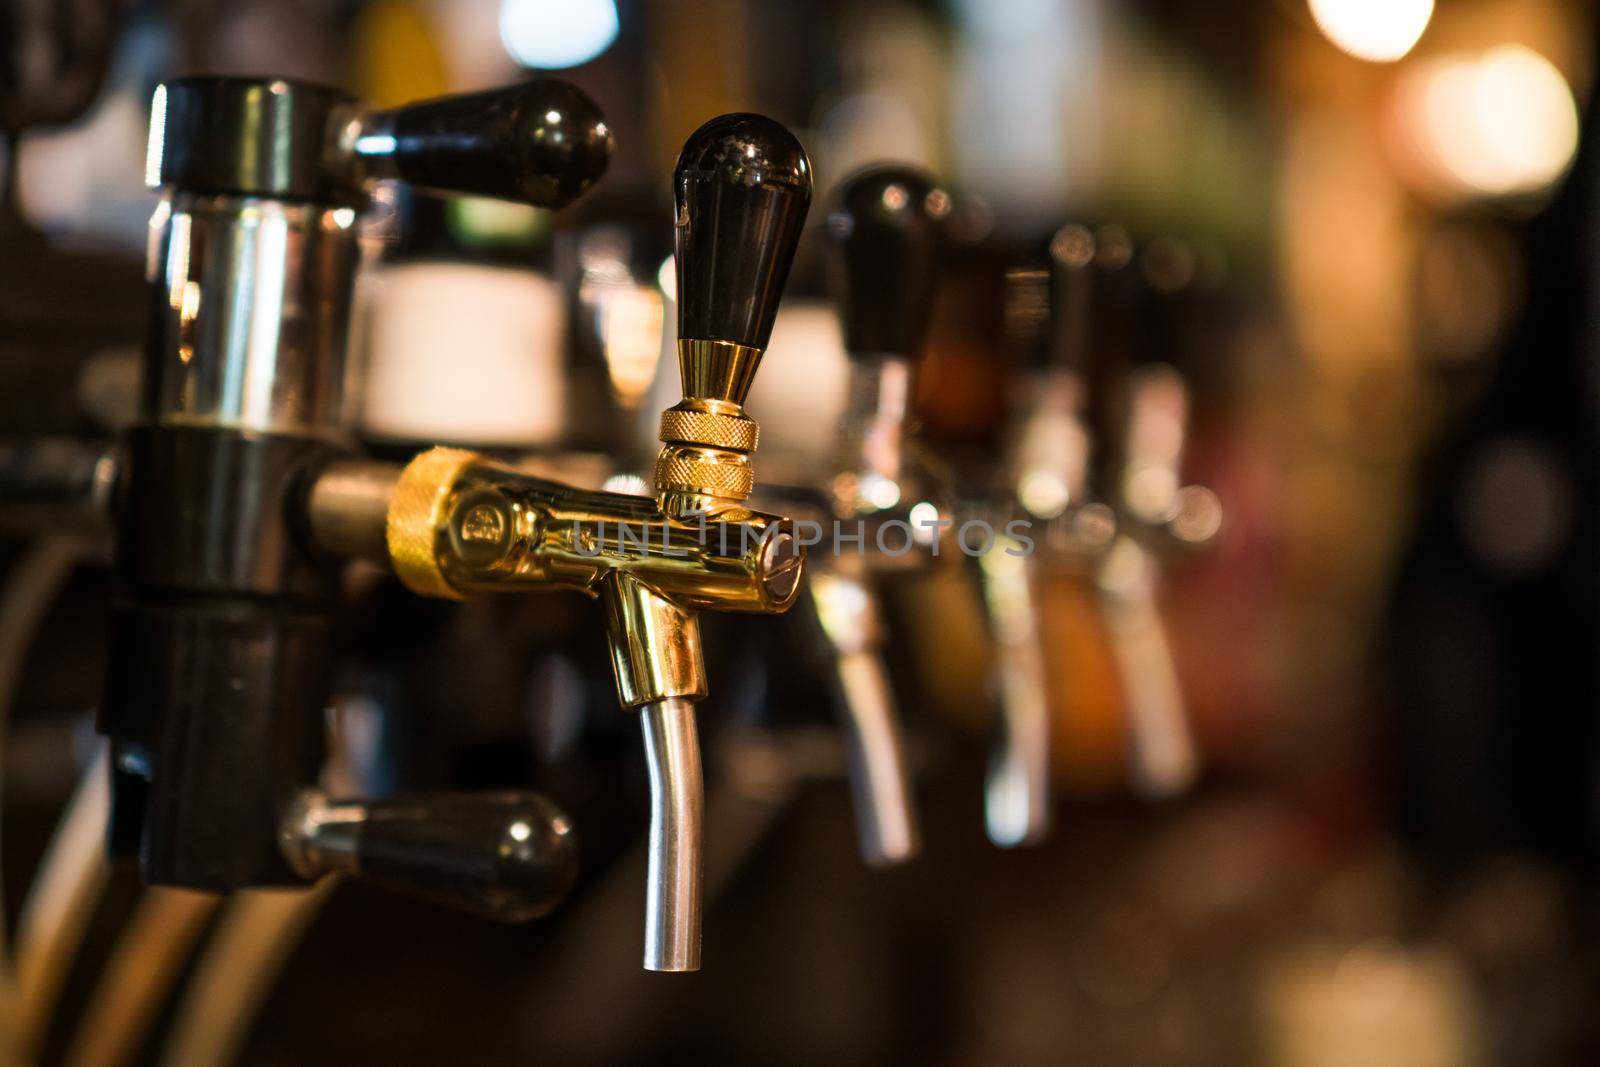 Beer taps by djoronimo